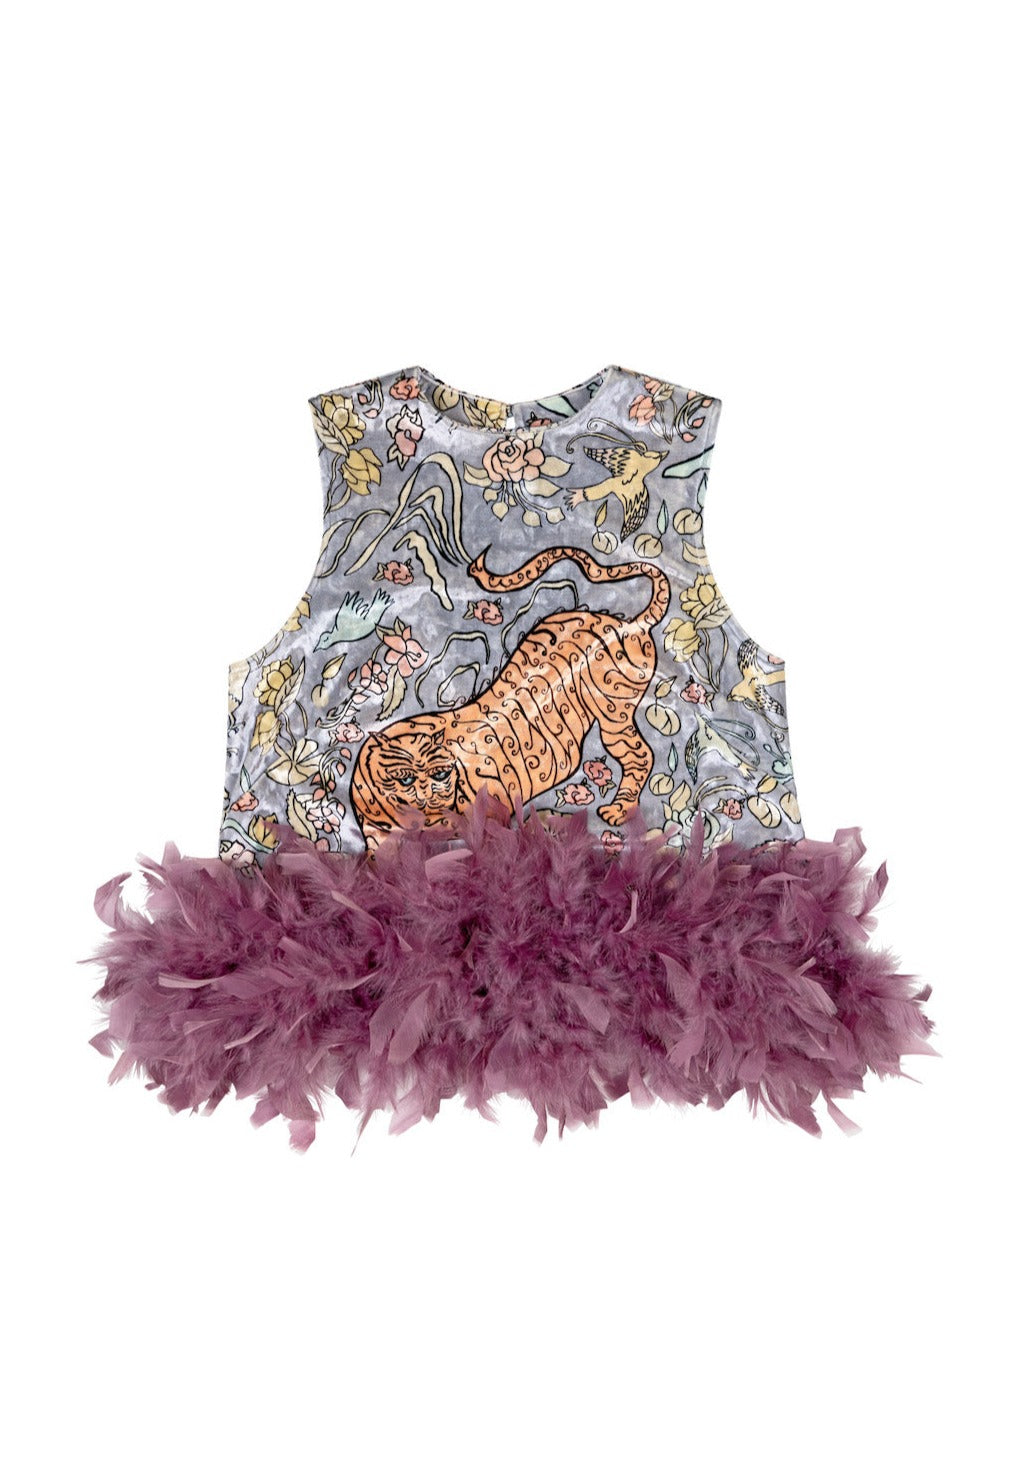 Luscious and glamorous, our Fennel Tank in Cabinet printed velvet features a hand-illustrated tiger and mauve feather trim.